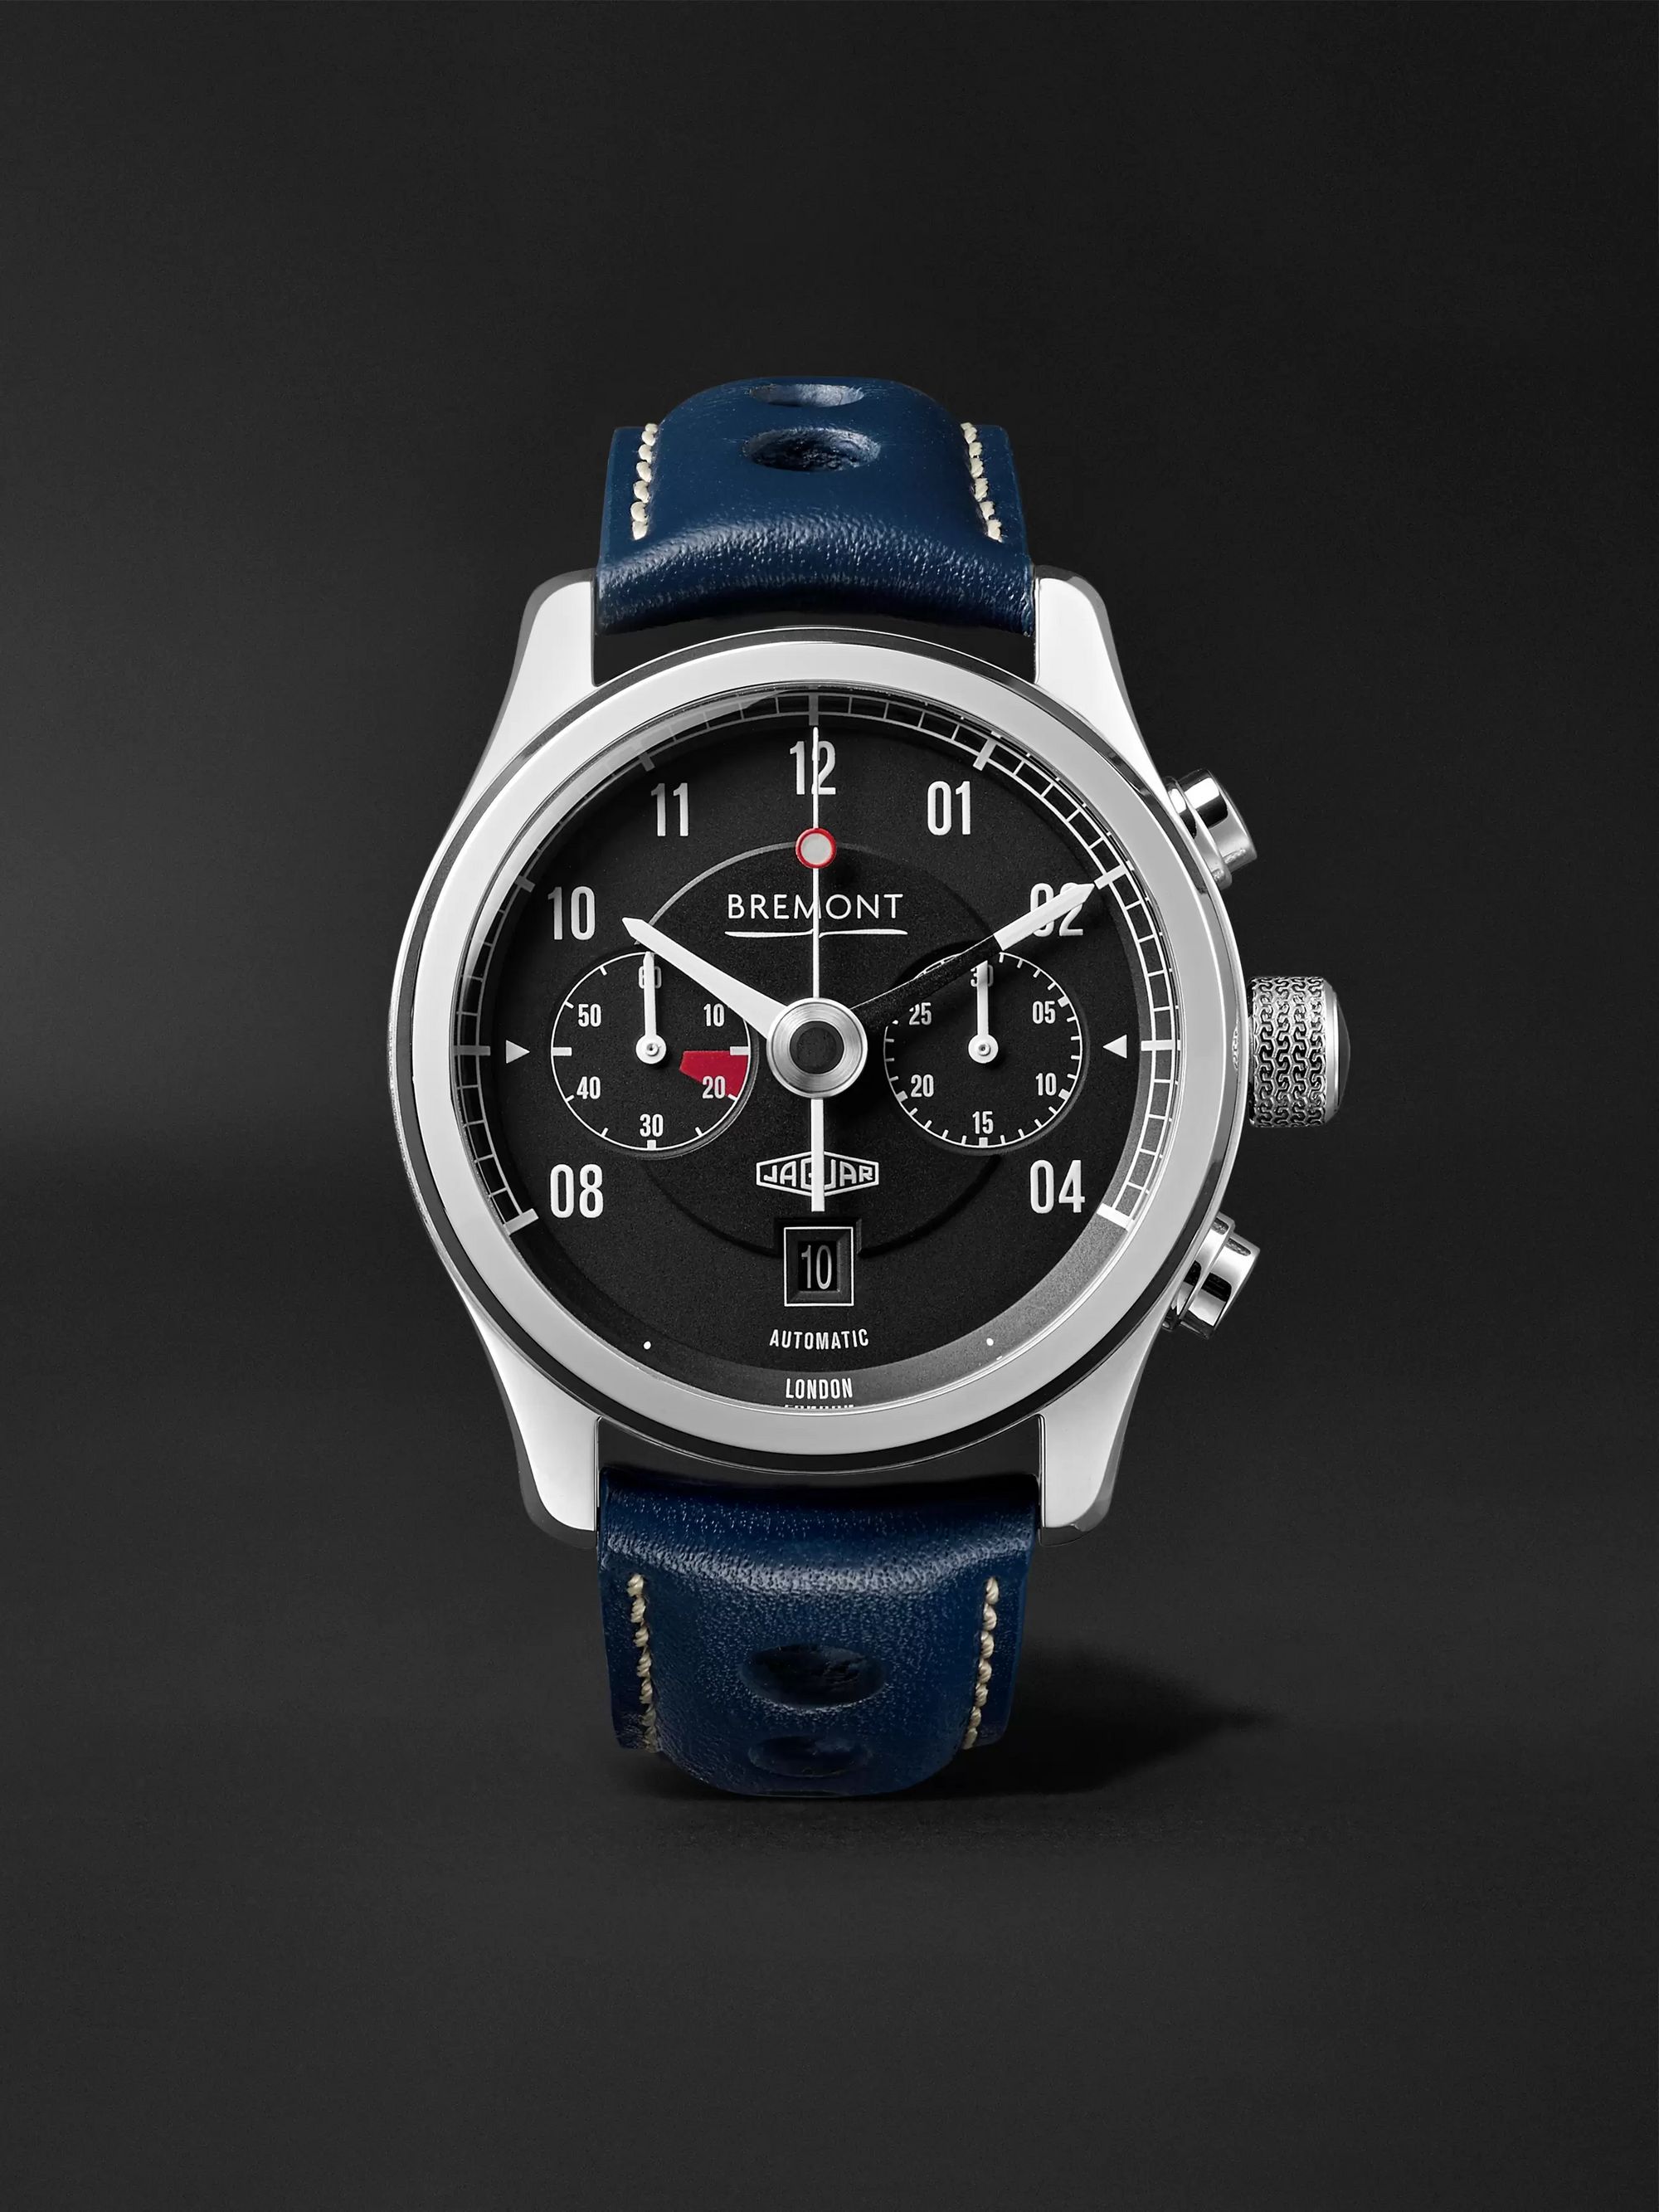 BREMONT MKII Jaguar Automatic Chronograph 43mm Stainless Steel and Leather Watch, Ref. No. J-MKII-BK-R-S